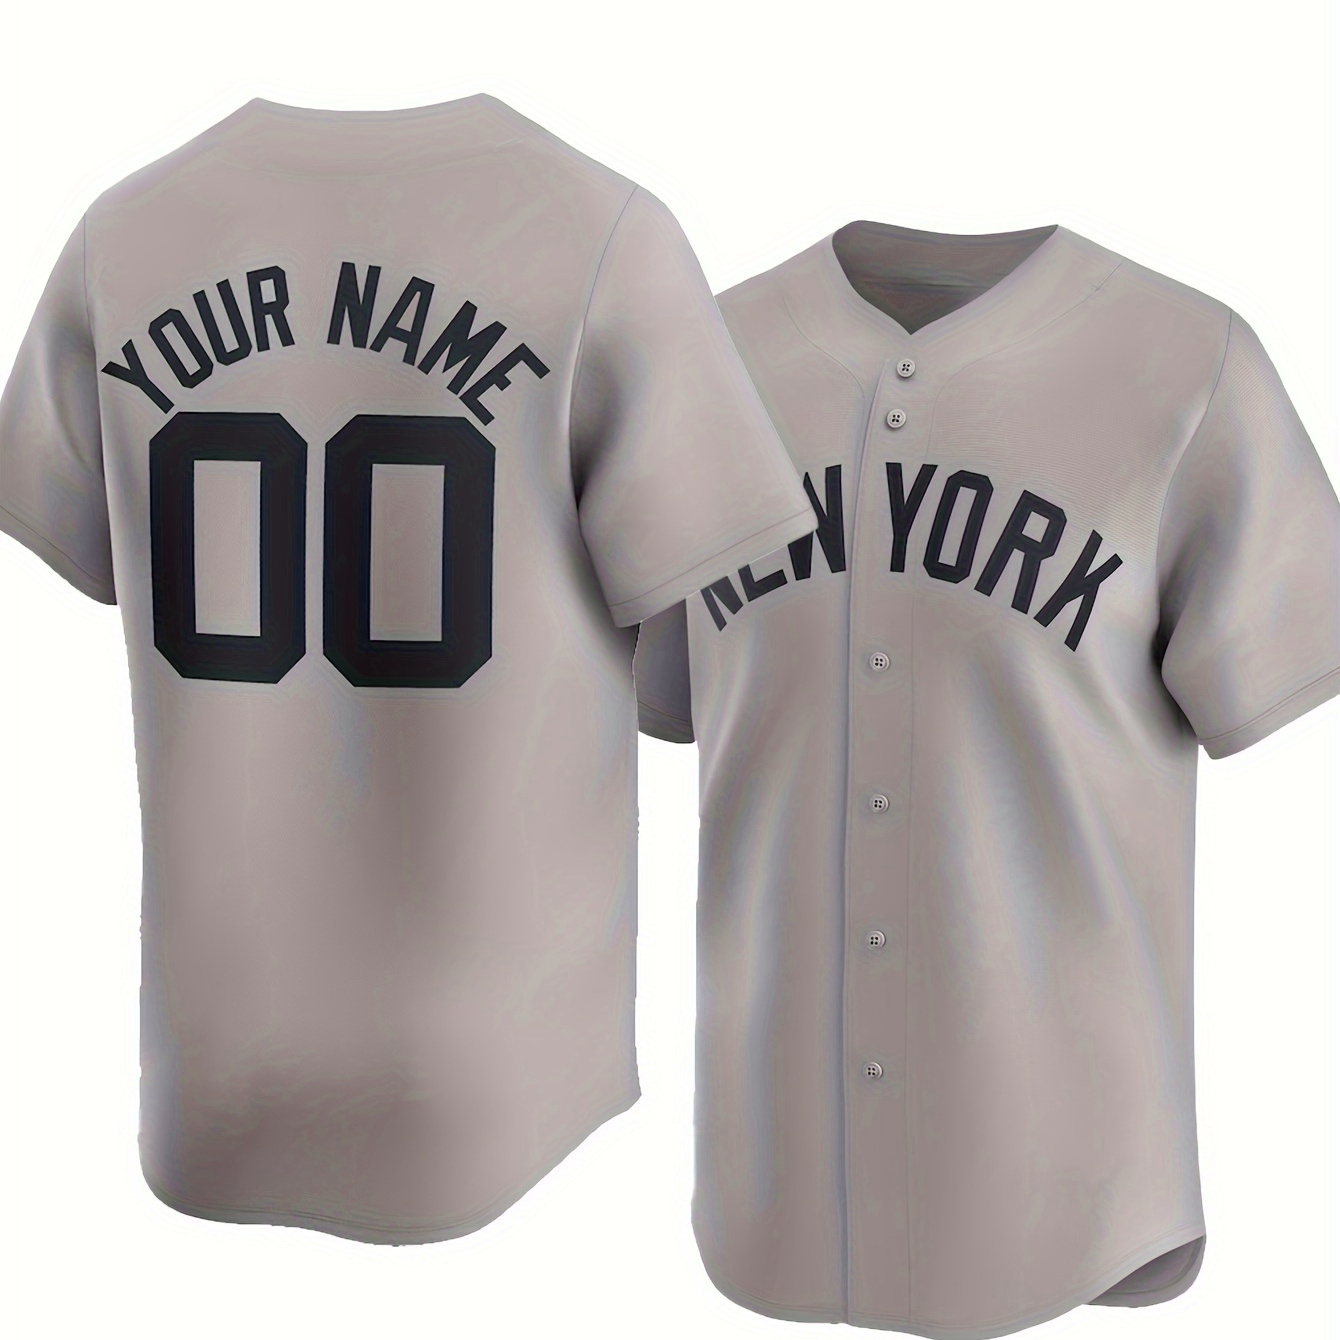 

Customized Name And Number Embroidery, Men's V-neck Baseball Jersey, Comfy Top For Training And Competition